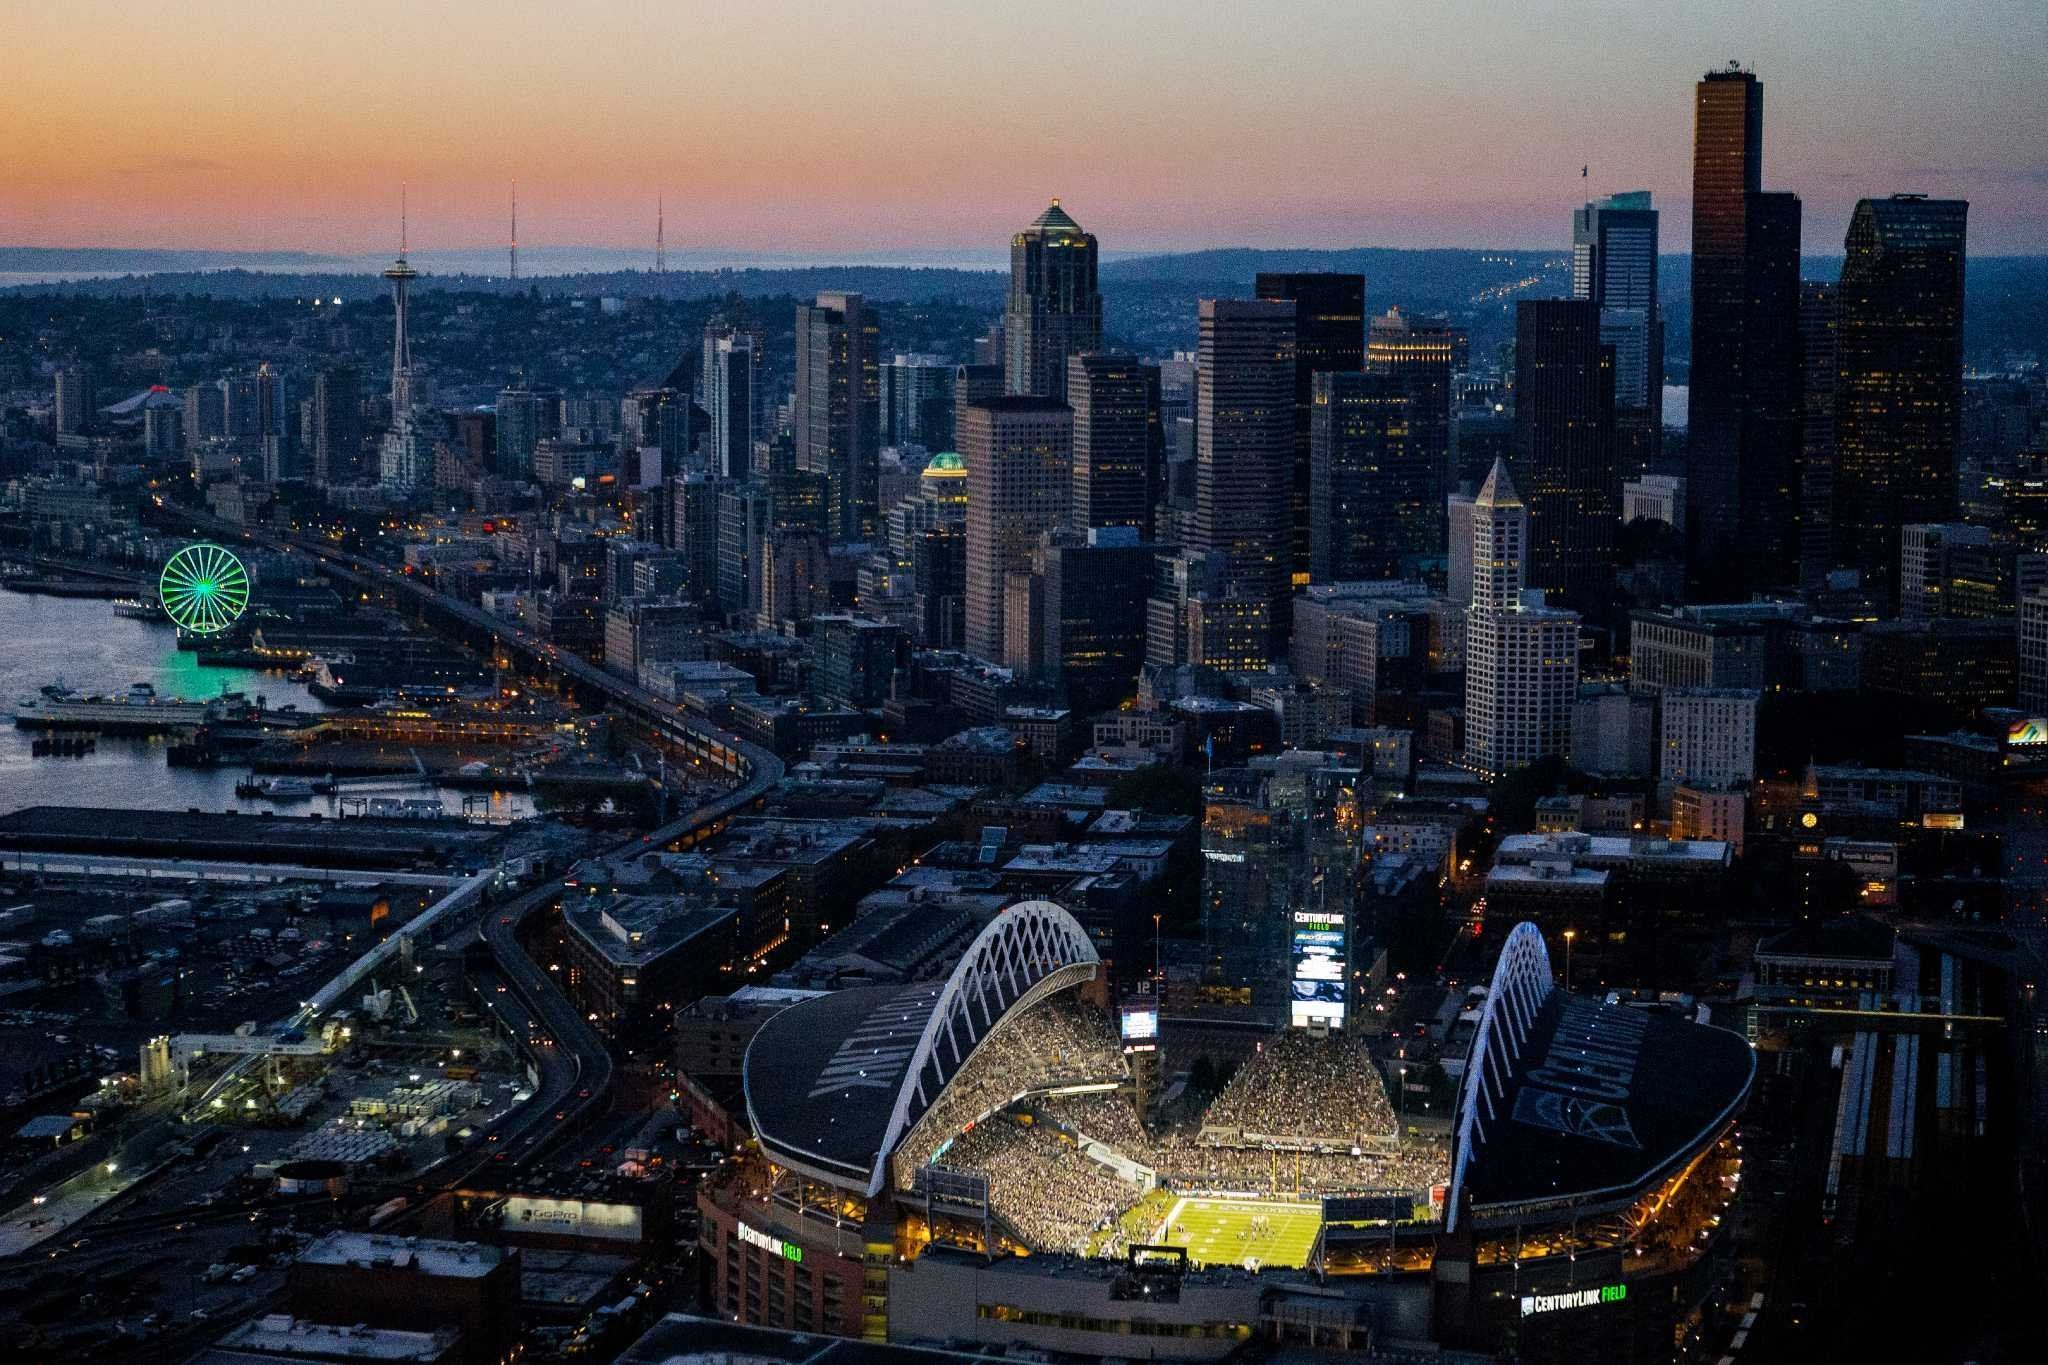 Seattle Seahawk Stadium Backgrounds | Wallpapers, Backgrounds ...